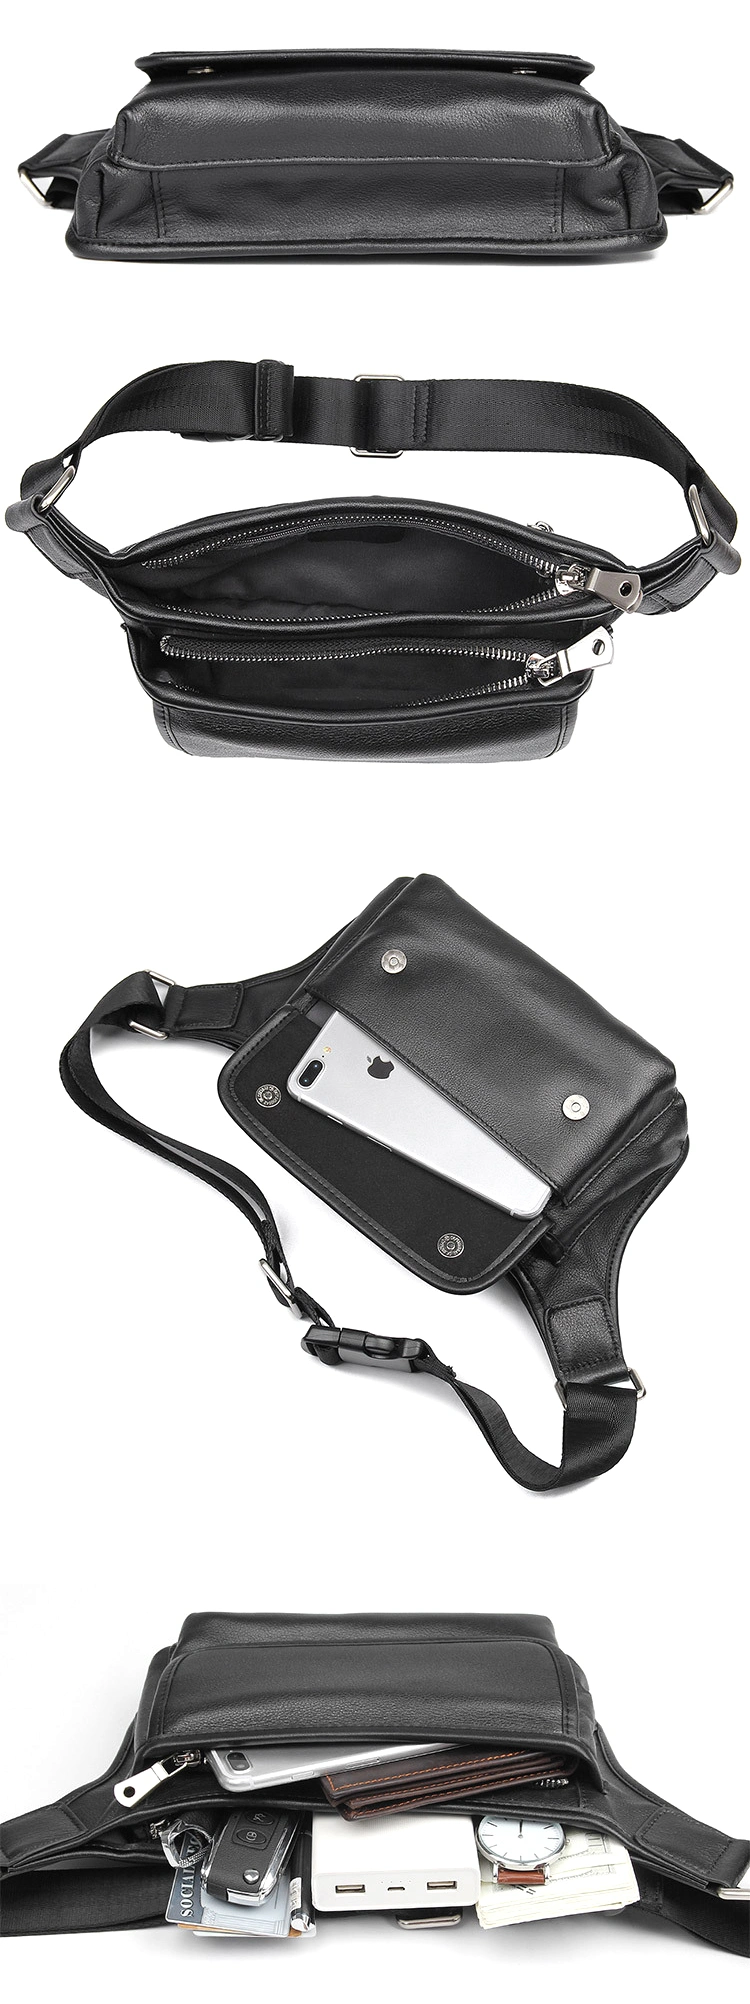 Amazon Hot Selling Black 100% Pure Leather Waist Bag Genuine Leather Fanny Pack for Men